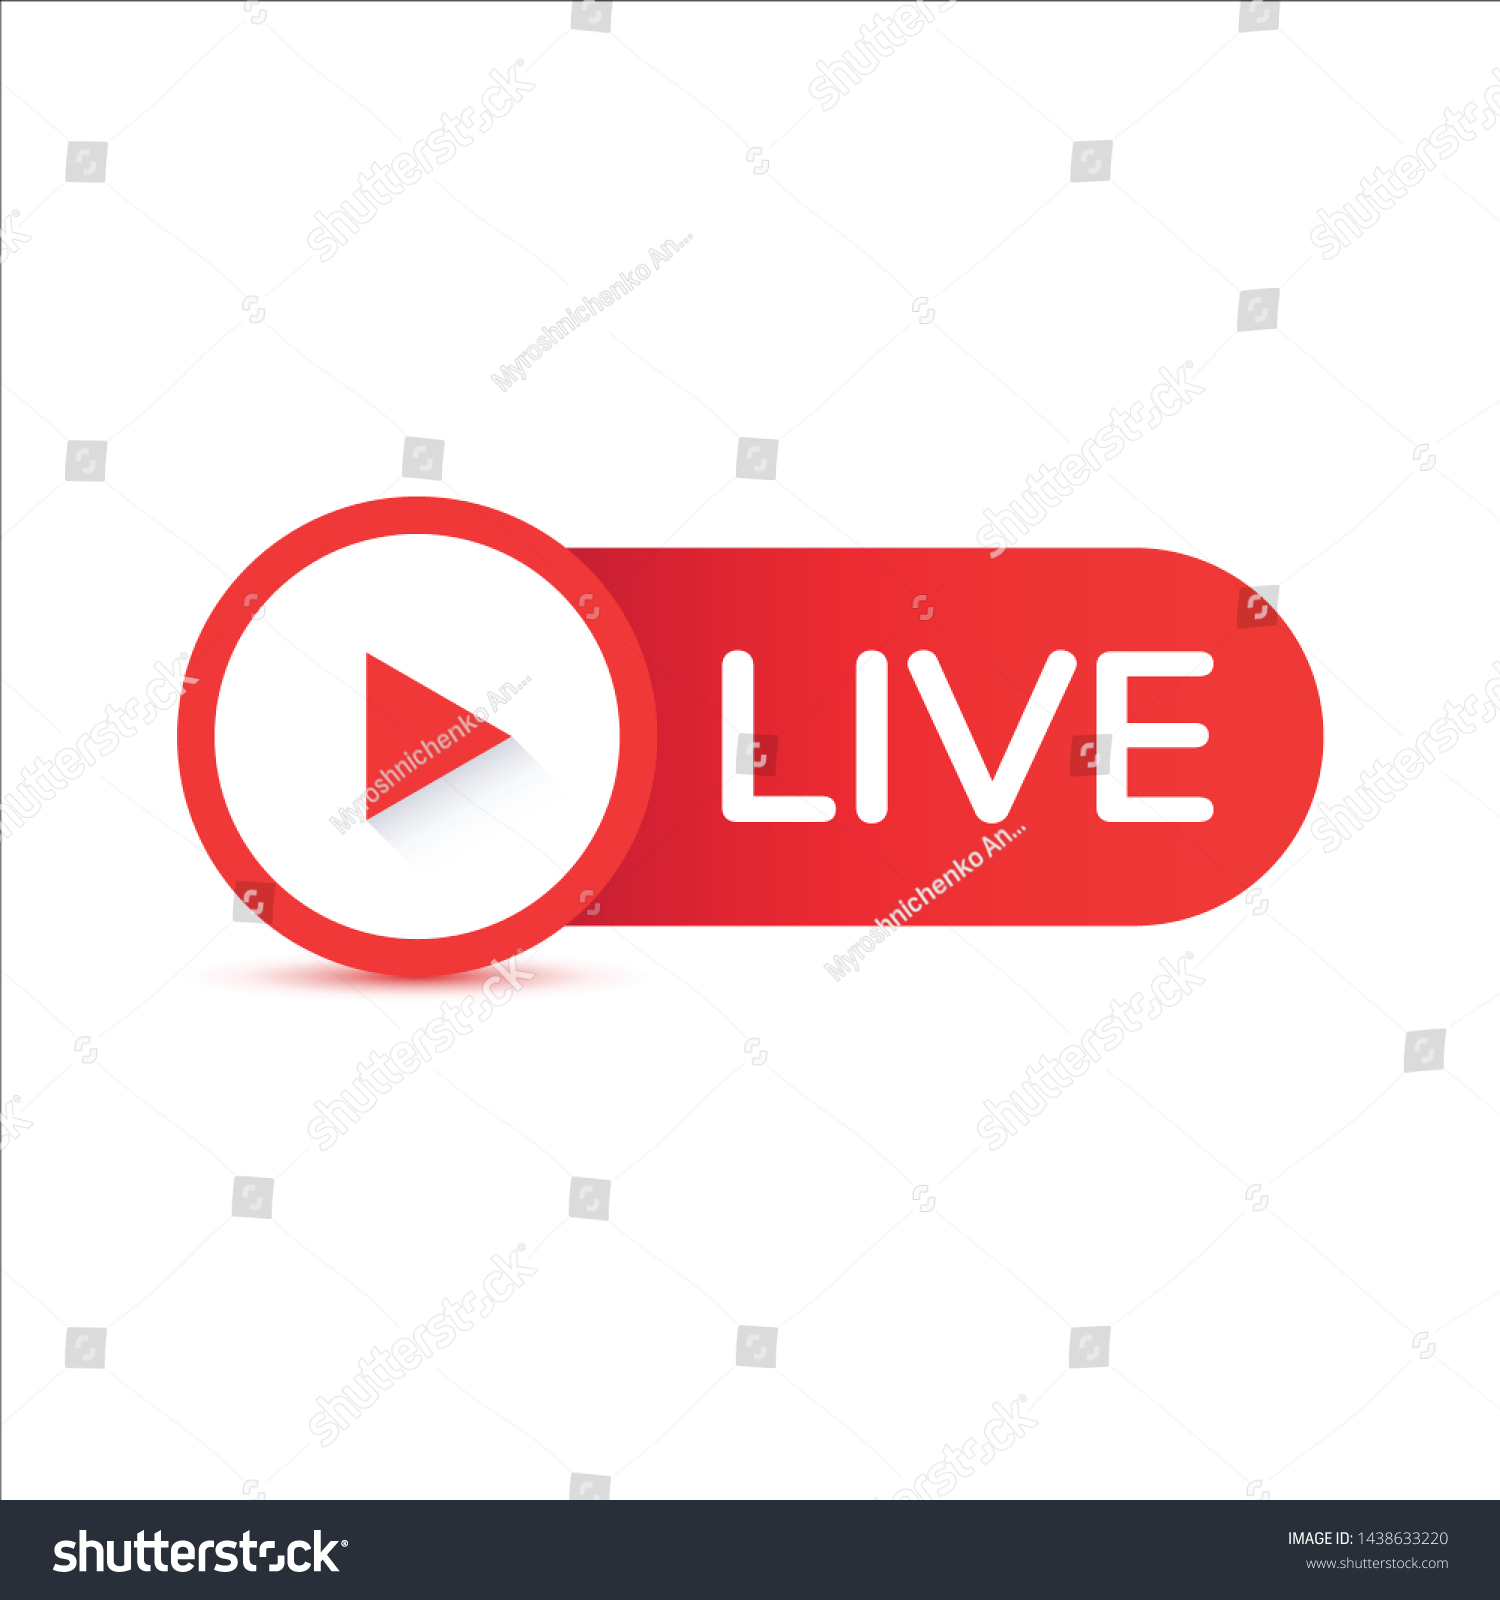 Live streaming flat vector icon. Red design element with play button for news,radio,TV or online broadcasting isolated on white background.  #1438633220